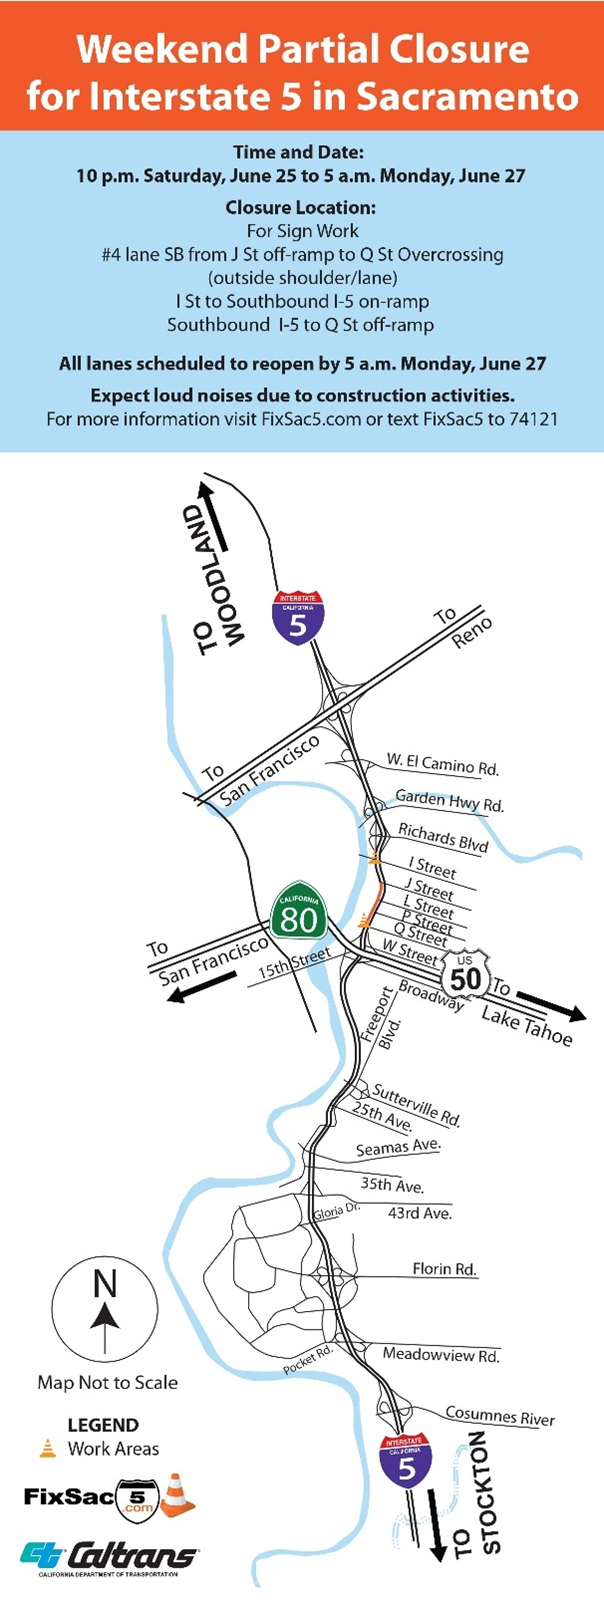 Map showing Interstate 5 partial closures from 10 p.m. Saturday, June 25 to 5 a.m. Monday, June 27 including Southbound I-5 lane #4 (outside lane) from J Street Off-ramp to Q Street Overcrossing, I Street to Southbound I-5 On-ramp, and Southbound I-5 to Q Street Off-ramp 